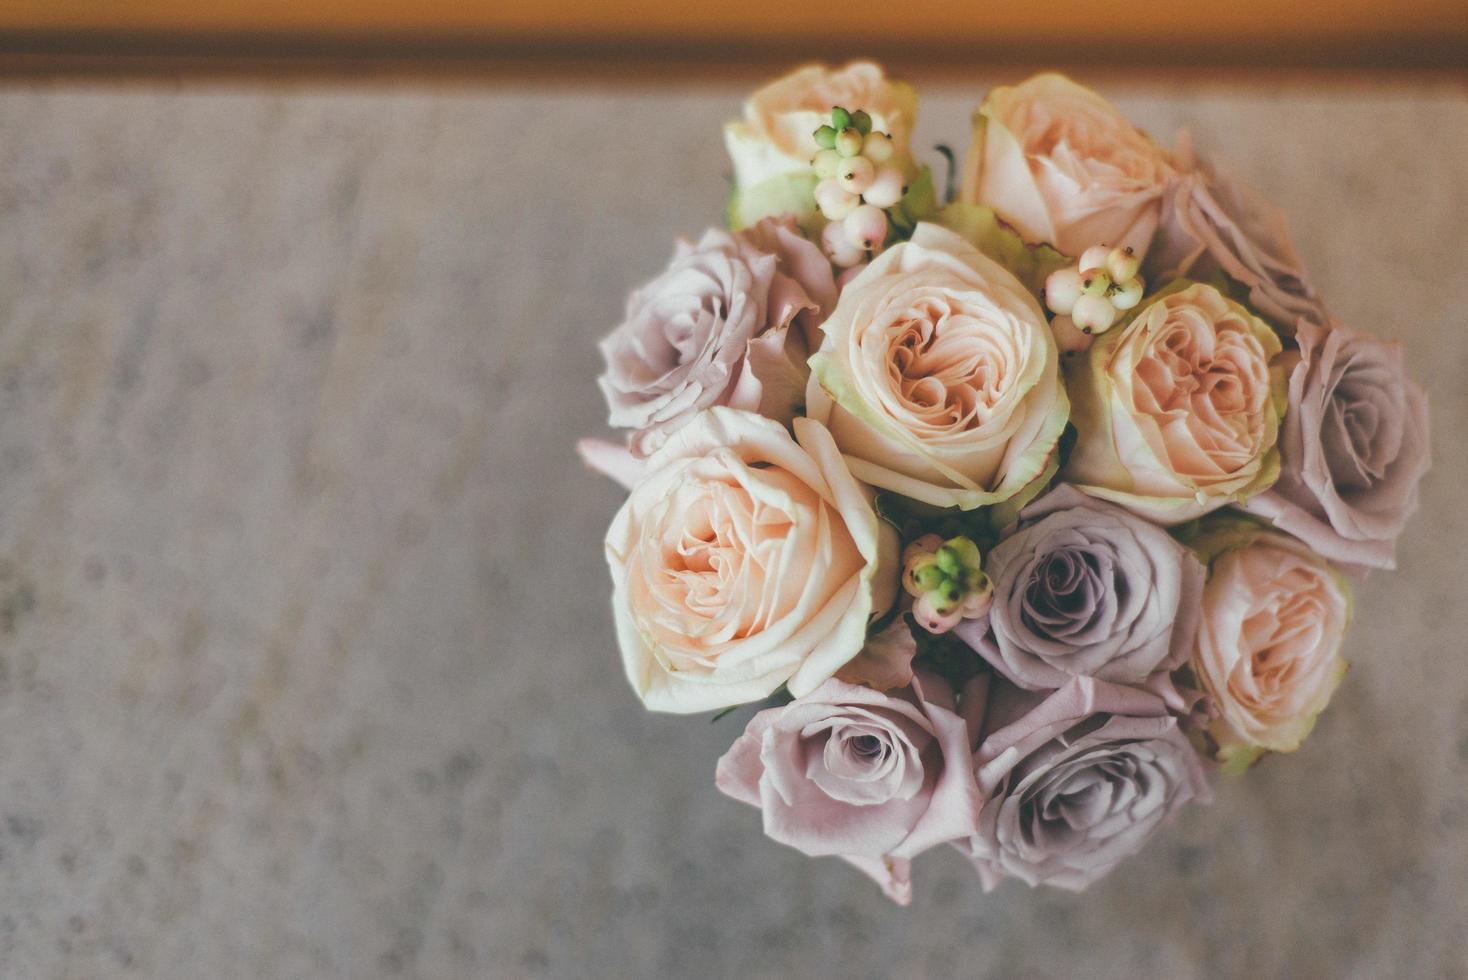 Top view of a bouquet photo